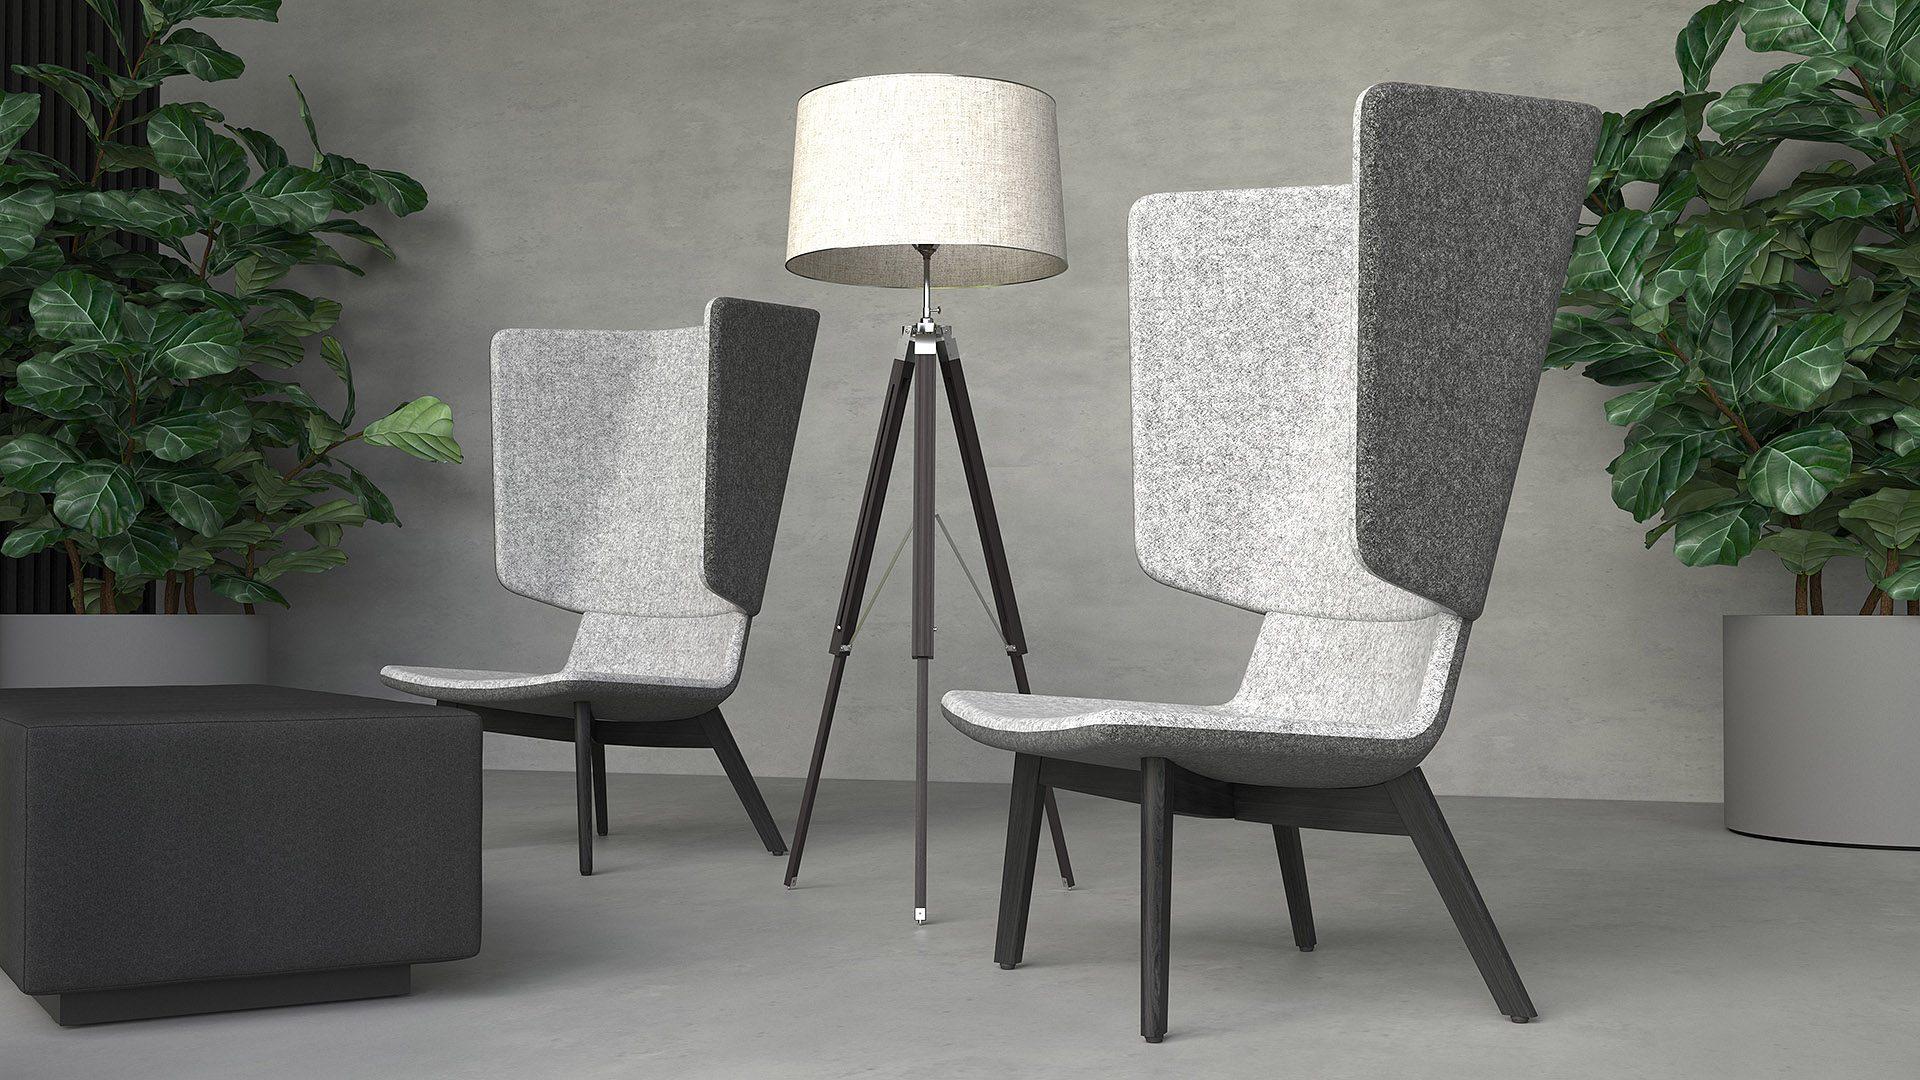 With its visually striking Scandinavian design, Twist &amp; Sit complements contemporary style office layouts